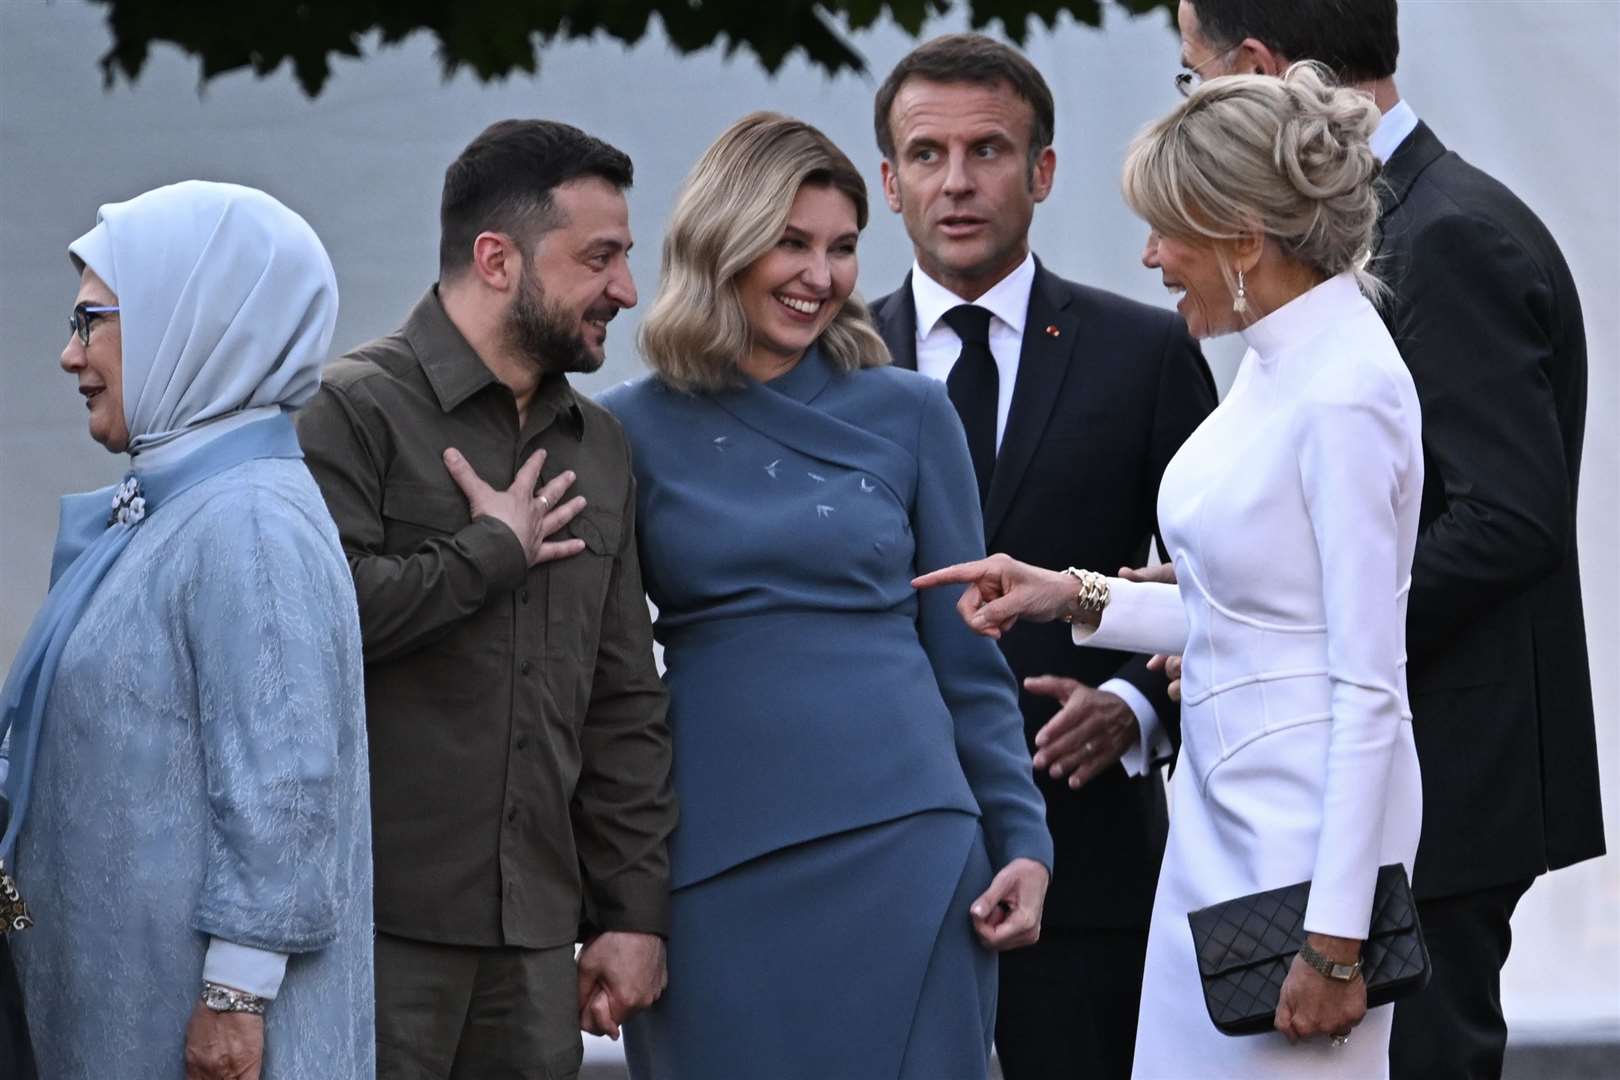 Ukrainian president Volodymyr Zelensky and his wife Olena Zelenska talk with French President Emmanuel Macron and his wife Brigitte Macron as they arrive for the social dinner during the Nato summit in Vilnius (Paul Ellis/PA)